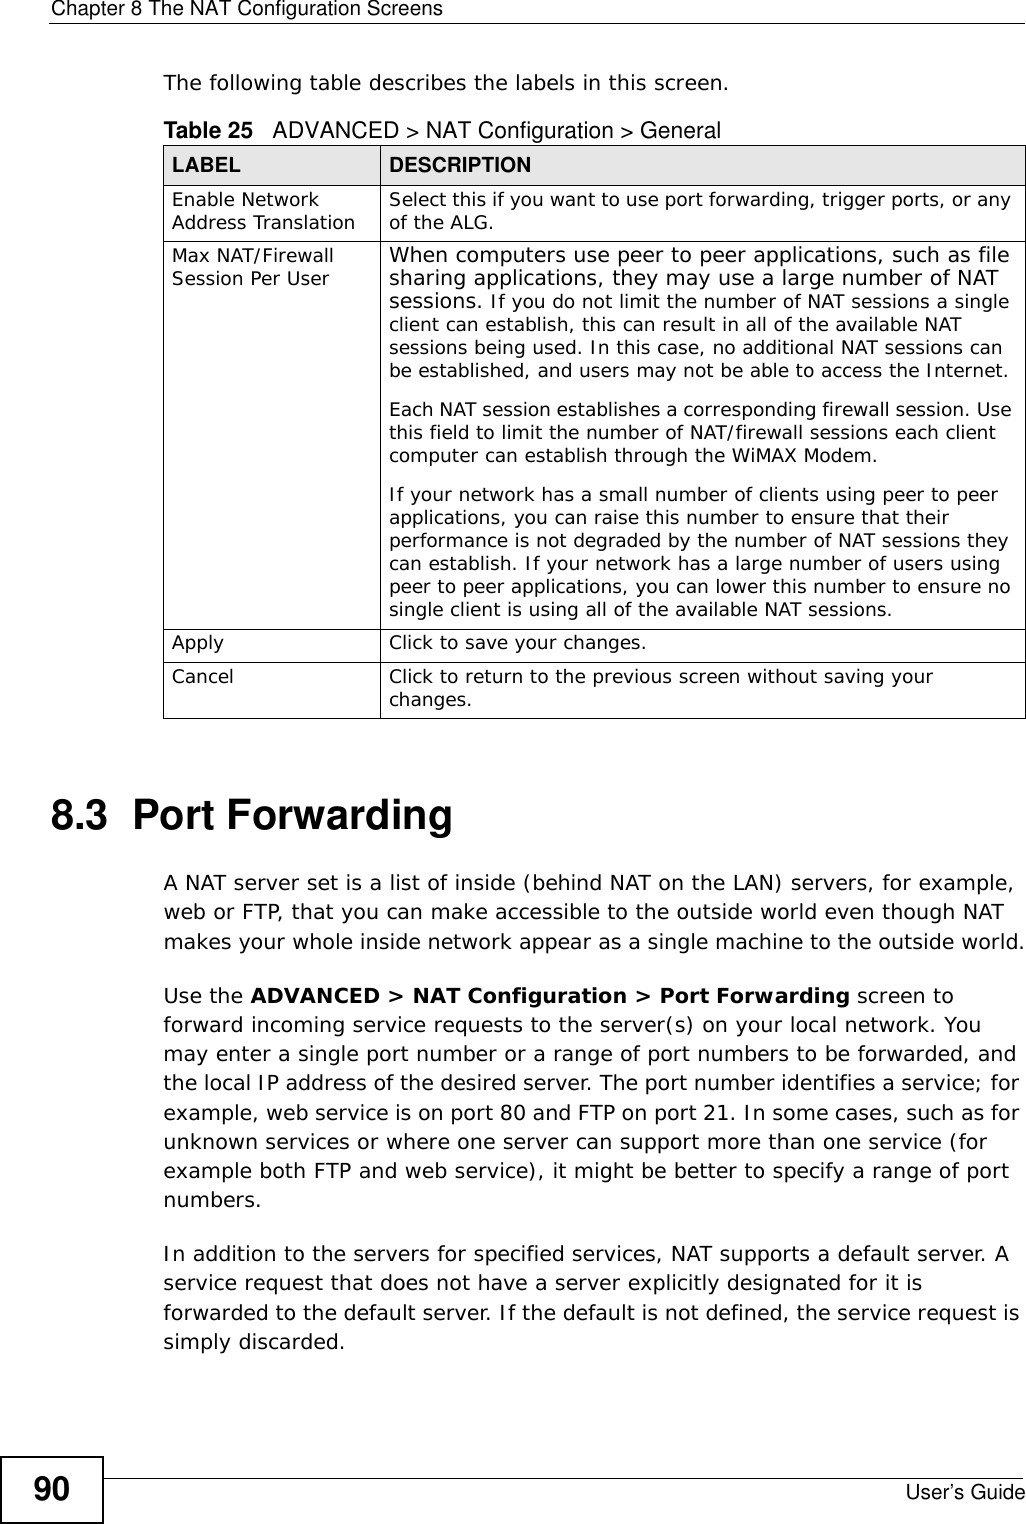 Chapter 8 The NAT Configuration ScreensUser’s Guide90The following table describes the labels in this screen.8.3  Port Forwarding A NAT server set is a list of inside (behind NAT on the LAN) servers, for example, web or FTP, that you can make accessible to the outside world even though NAT makes your whole inside network appear as a single machine to the outside world.Use the ADVANCED &gt; NAT Configuration &gt; Port Forwarding screen to forward incoming service requests to the server(s) on your local network. You may enter a single port number or a range of port numbers to be forwarded, and the local IP address of the desired server. The port number identifies a service; for example, web service is on port 80 and FTP on port 21. In some cases, such as for unknown services or where one server can support more than one service (for example both FTP and web service), it might be better to specify a range of port numbers. In addition to the servers for specified services, NAT supports a default server. A service request that does not have a server explicitly designated for it is forwarded to the default server. If the default is not defined, the service request is simply discarded.Table 25   ADVANCED &gt; NAT Configuration &gt; GeneralLABEL DESCRIPTIONEnable Network Address Translation Select this if you want to use port forwarding, trigger ports, or any of the ALG.Max NAT/Firewall Session Per User When computers use peer to peer applications, such as file sharing applications, they may use a large number of NAT sessions. If you do not limit the number of NAT sessions a single client can establish, this can result in all of the available NAT sessions being used. In this case, no additional NAT sessions can be established, and users may not be able to access the Internet. Each NAT session establishes a corresponding firewall session. Use this field to limit the number of NAT/firewall sessions each client computer can establish through the WiMAX Modem. If your network has a small number of clients using peer to peer applications, you can raise this number to ensure that their performance is not degraded by the number of NAT sessions they can establish. If your network has a large number of users using peer to peer applications, you can lower this number to ensure no single client is using all of the available NAT sessions. Apply Click to save your changes.Cancel Click to return to the previous screen without saving your changes.